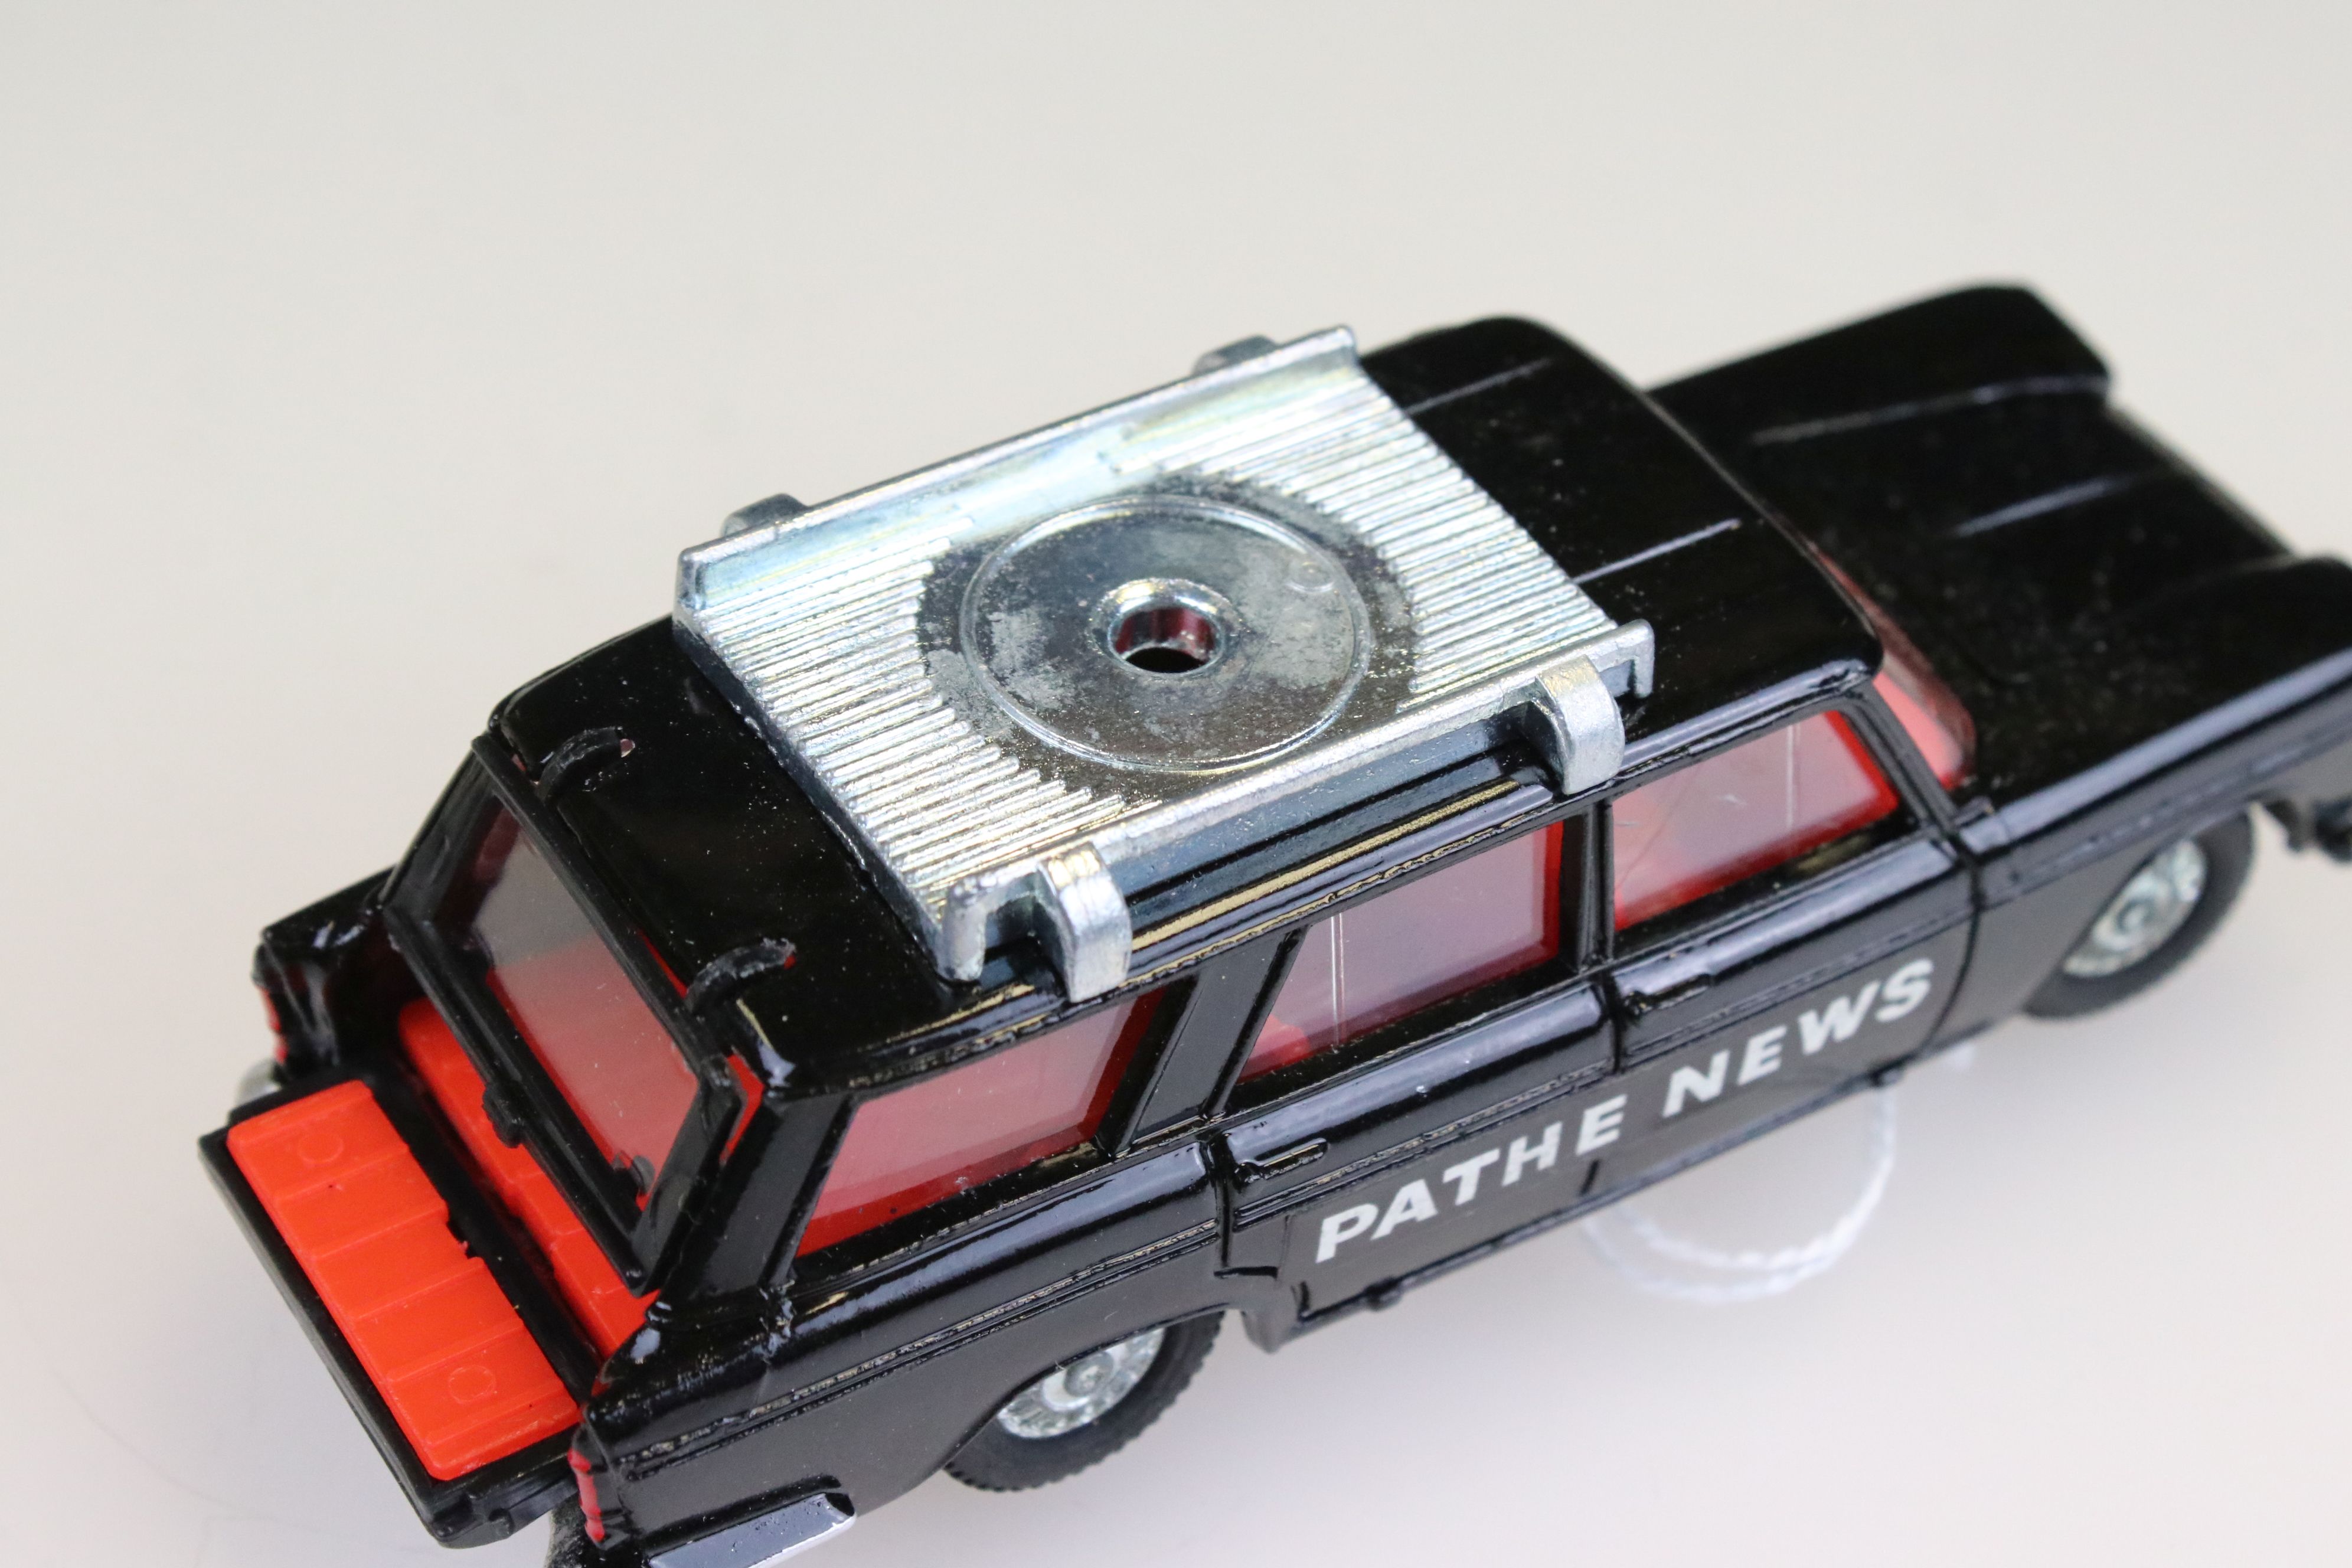 Boxed Dinky 281 Pathe News Camera Car diecast model complete with cameraman figure, diecast & decals - Image 6 of 12